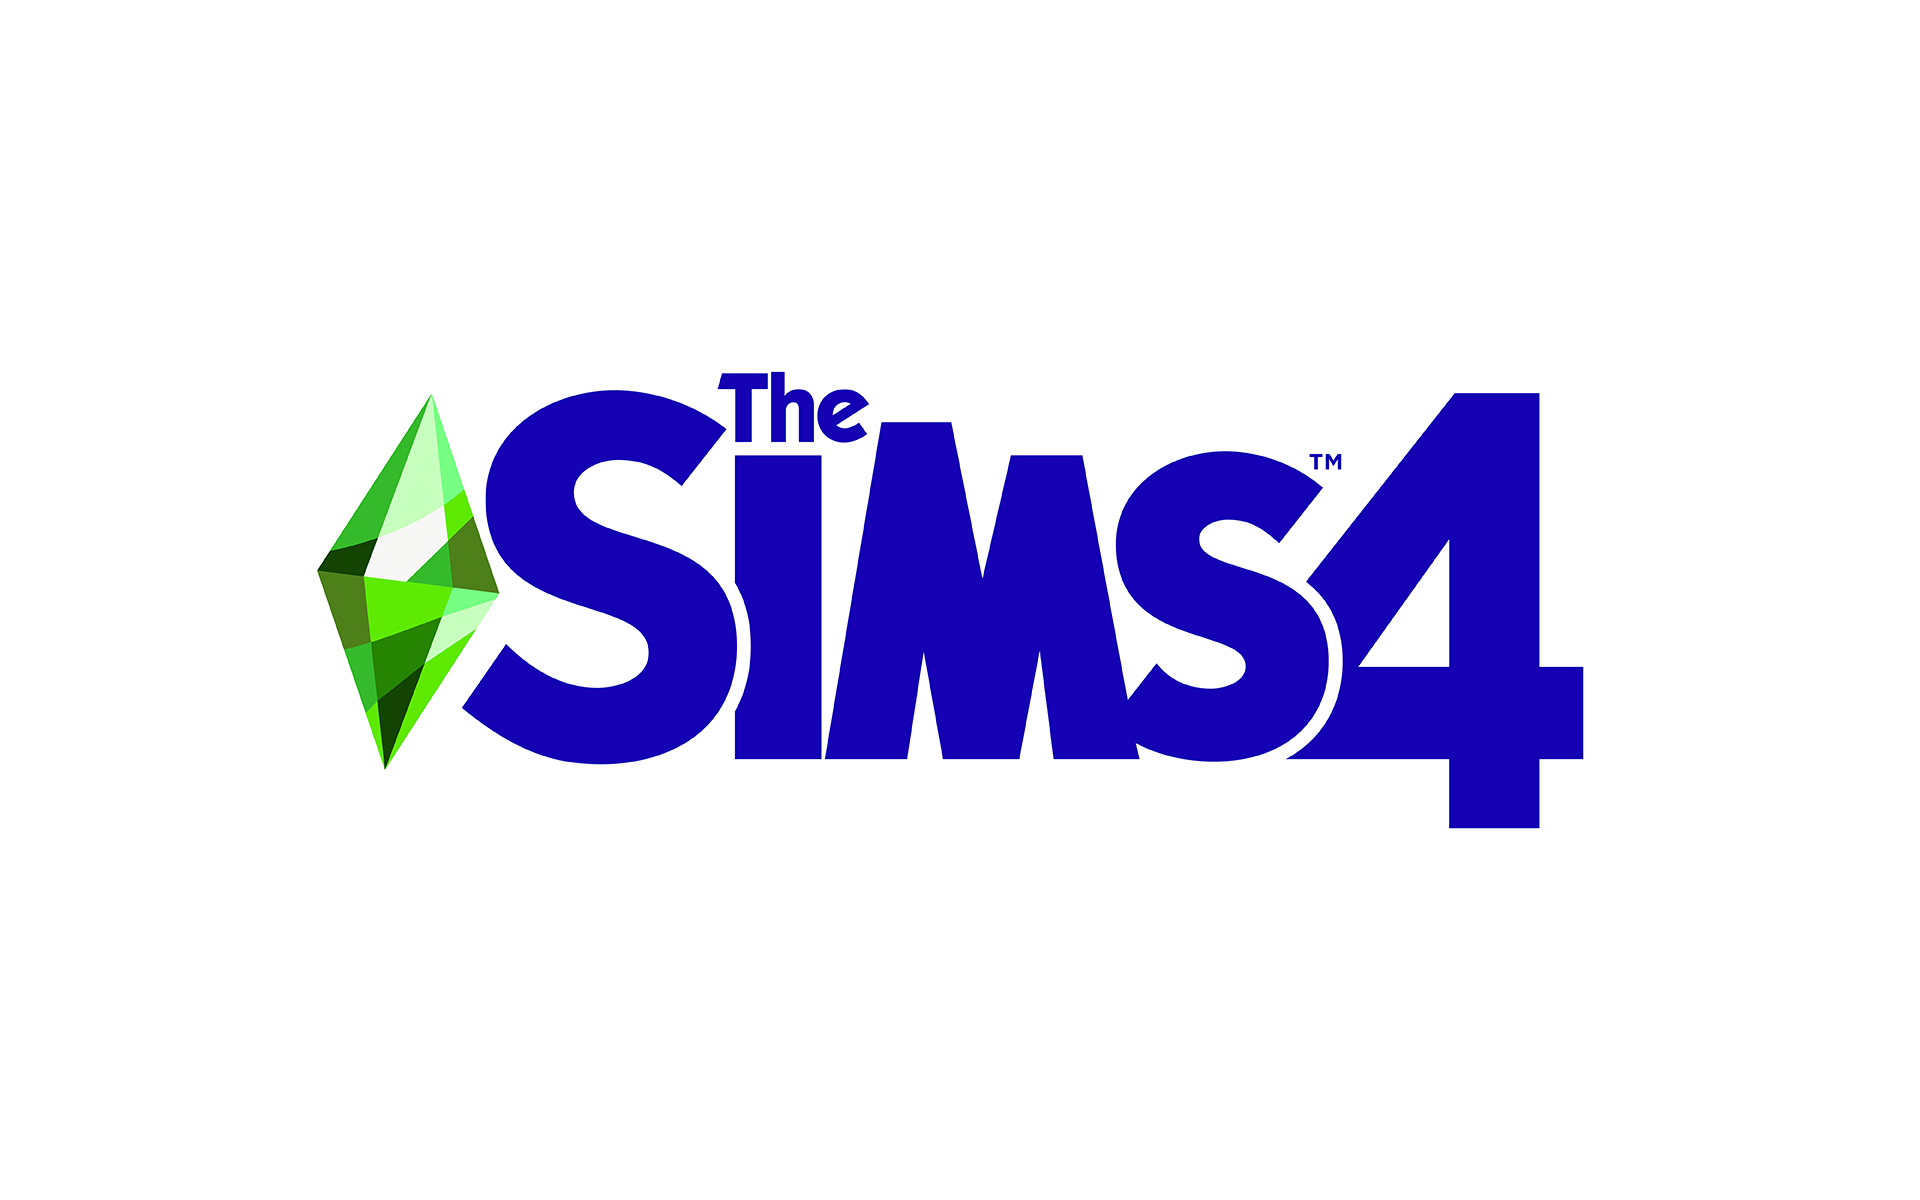 Electronic Arts Inc. - The Sims™ 4 Becomes the Most Widely Played Game in  the 23 Year History of the Franchise With More Than 70 Million Players  Worldwide